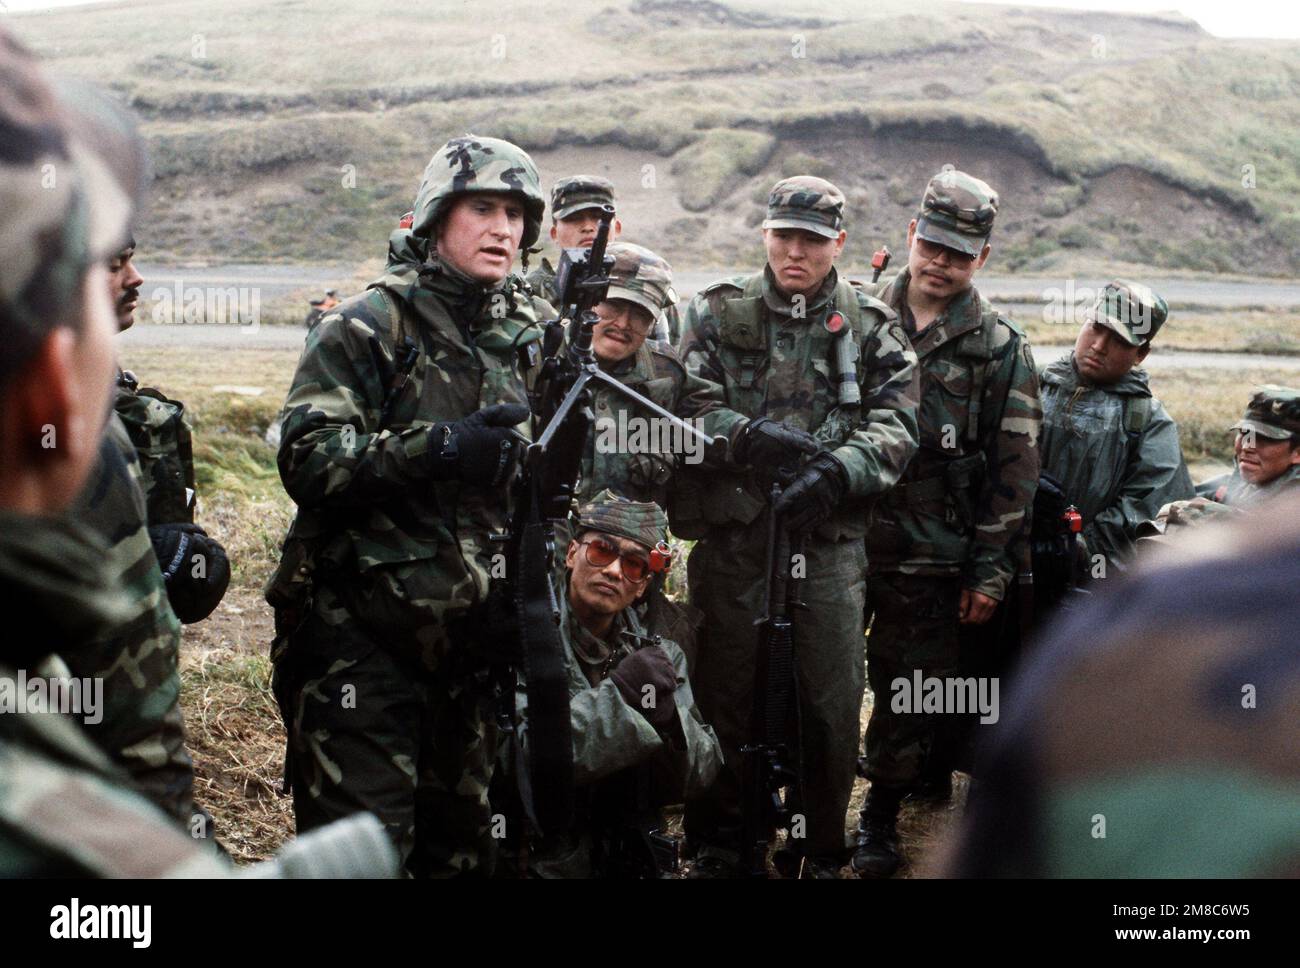 Marine 1LT John Wills conducts a class on the M-249 squad automatic weapon for members of Co. C, 2nd Bn., 297th Infantry Group (Scout), Alaska National Guard, scans the area for aggressor forces during exercise Kernal Potlatch '89. Subject Operation/Series: KERNAL POTLATCH '89 Base: Amchitka Island State: Alaska (AK) Country: United States Of America (USA) Stock Photo